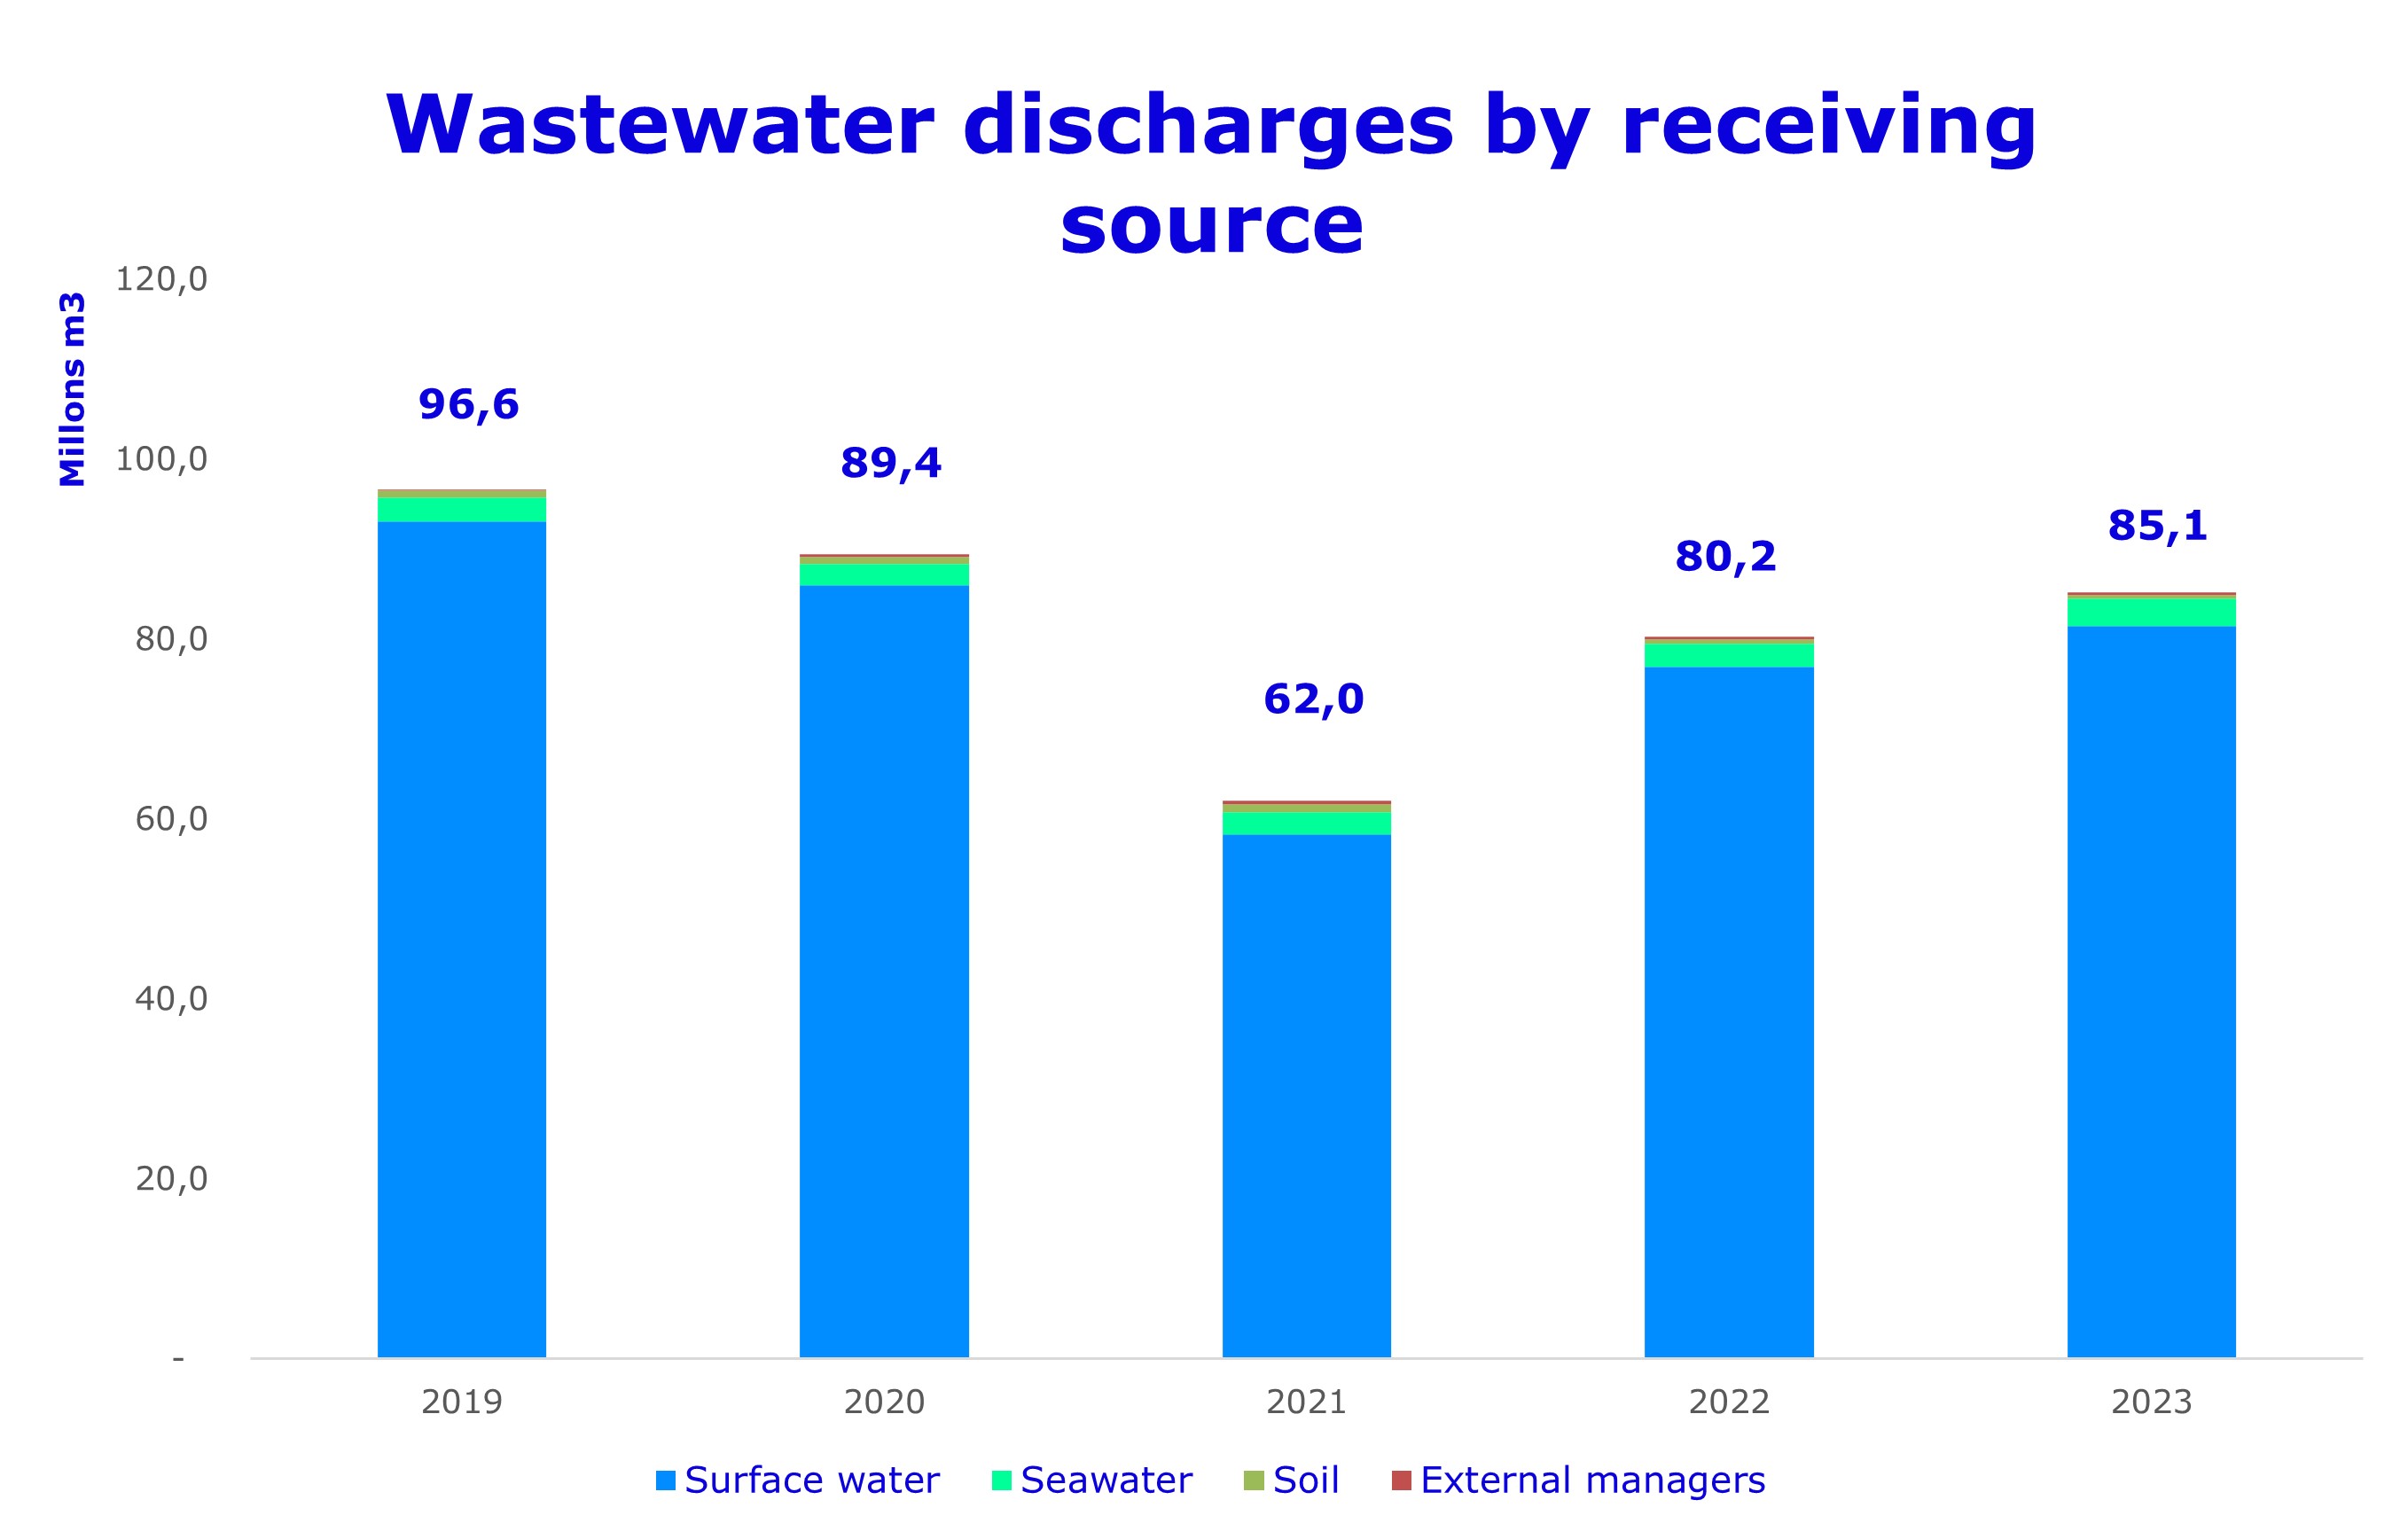 Wastewater discharges by receiving source